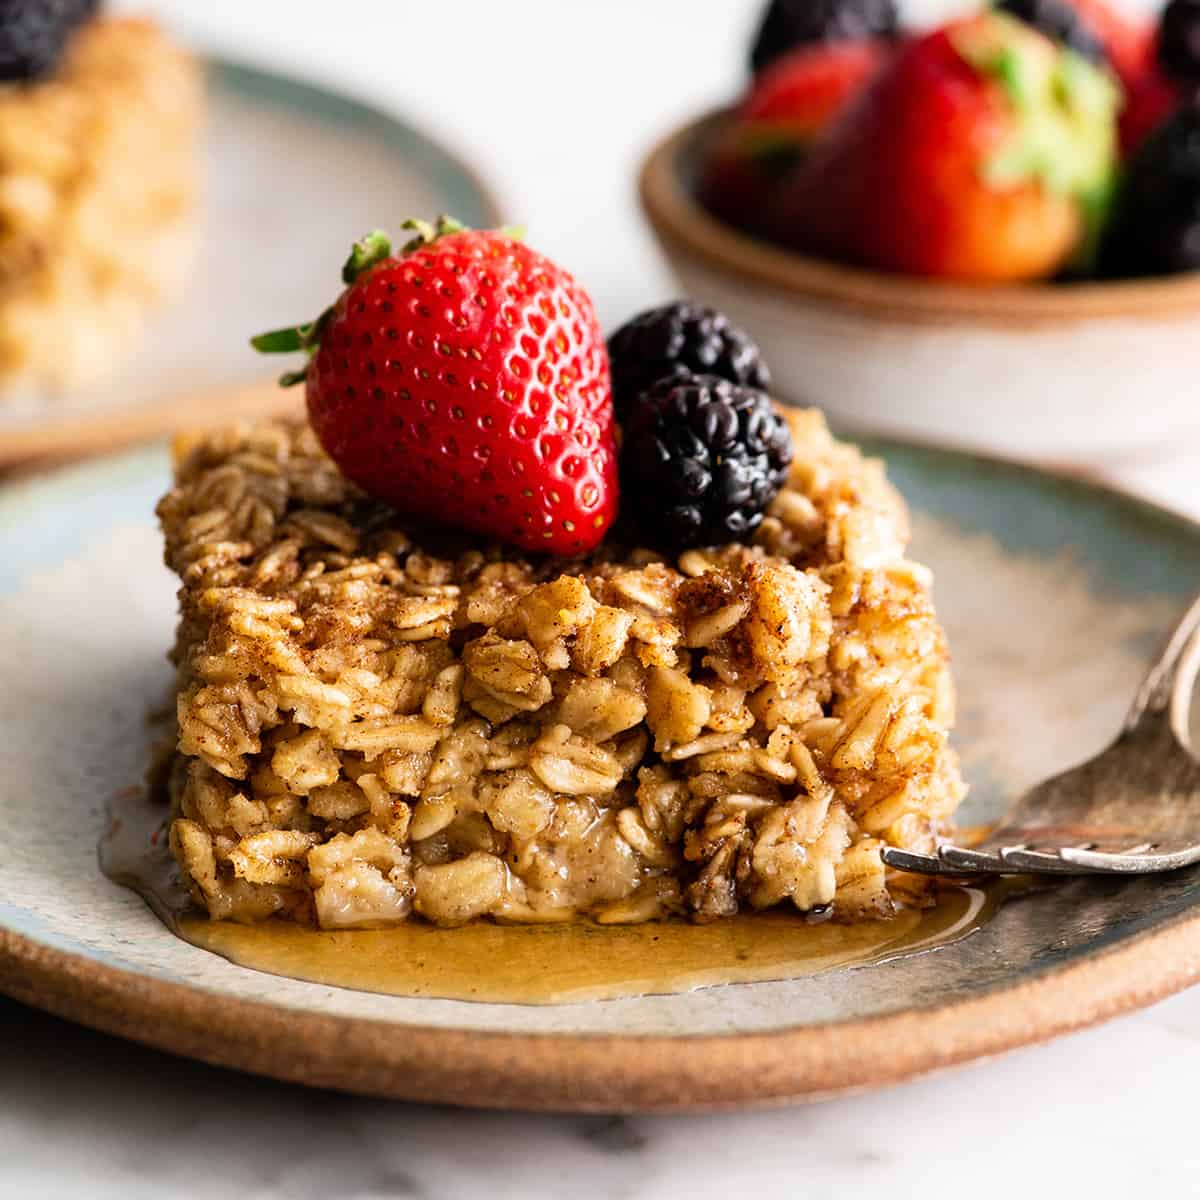 a piece of baked oatmeal on a plate with syrup and berries